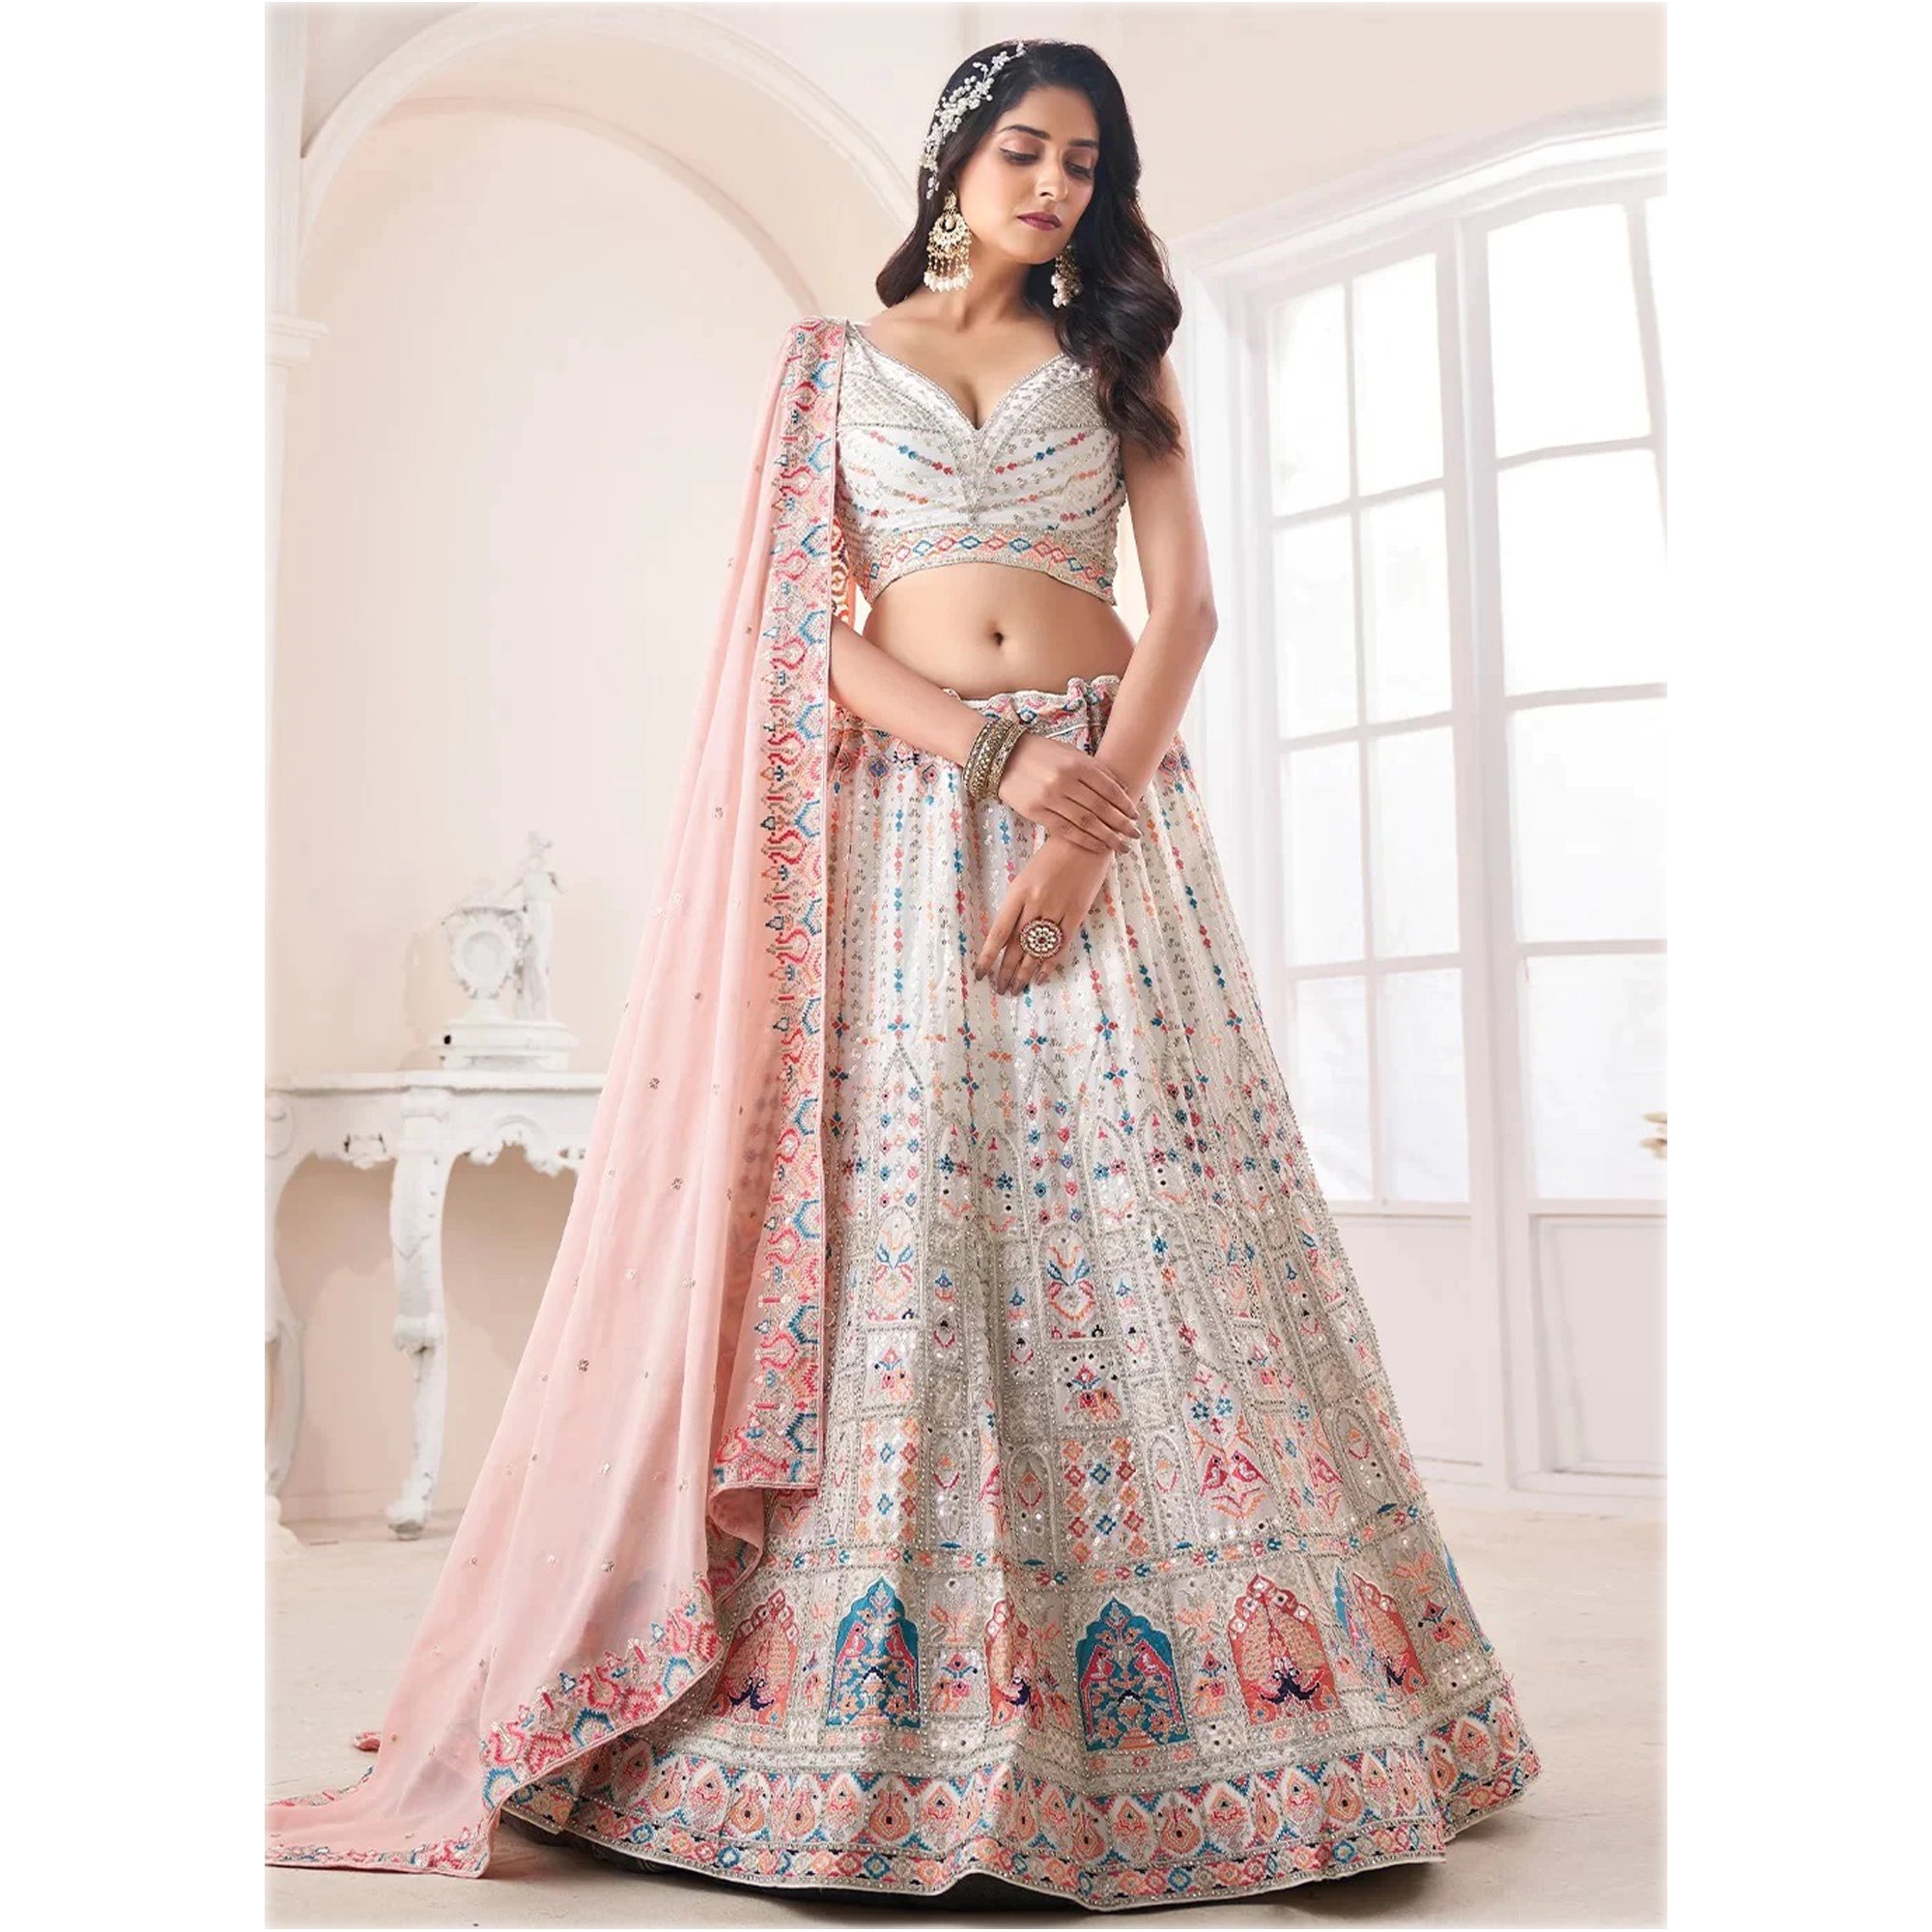 Off White Color Ready To Wear Georgette Fabric Indian Wedding Heavy Lehenga Choli